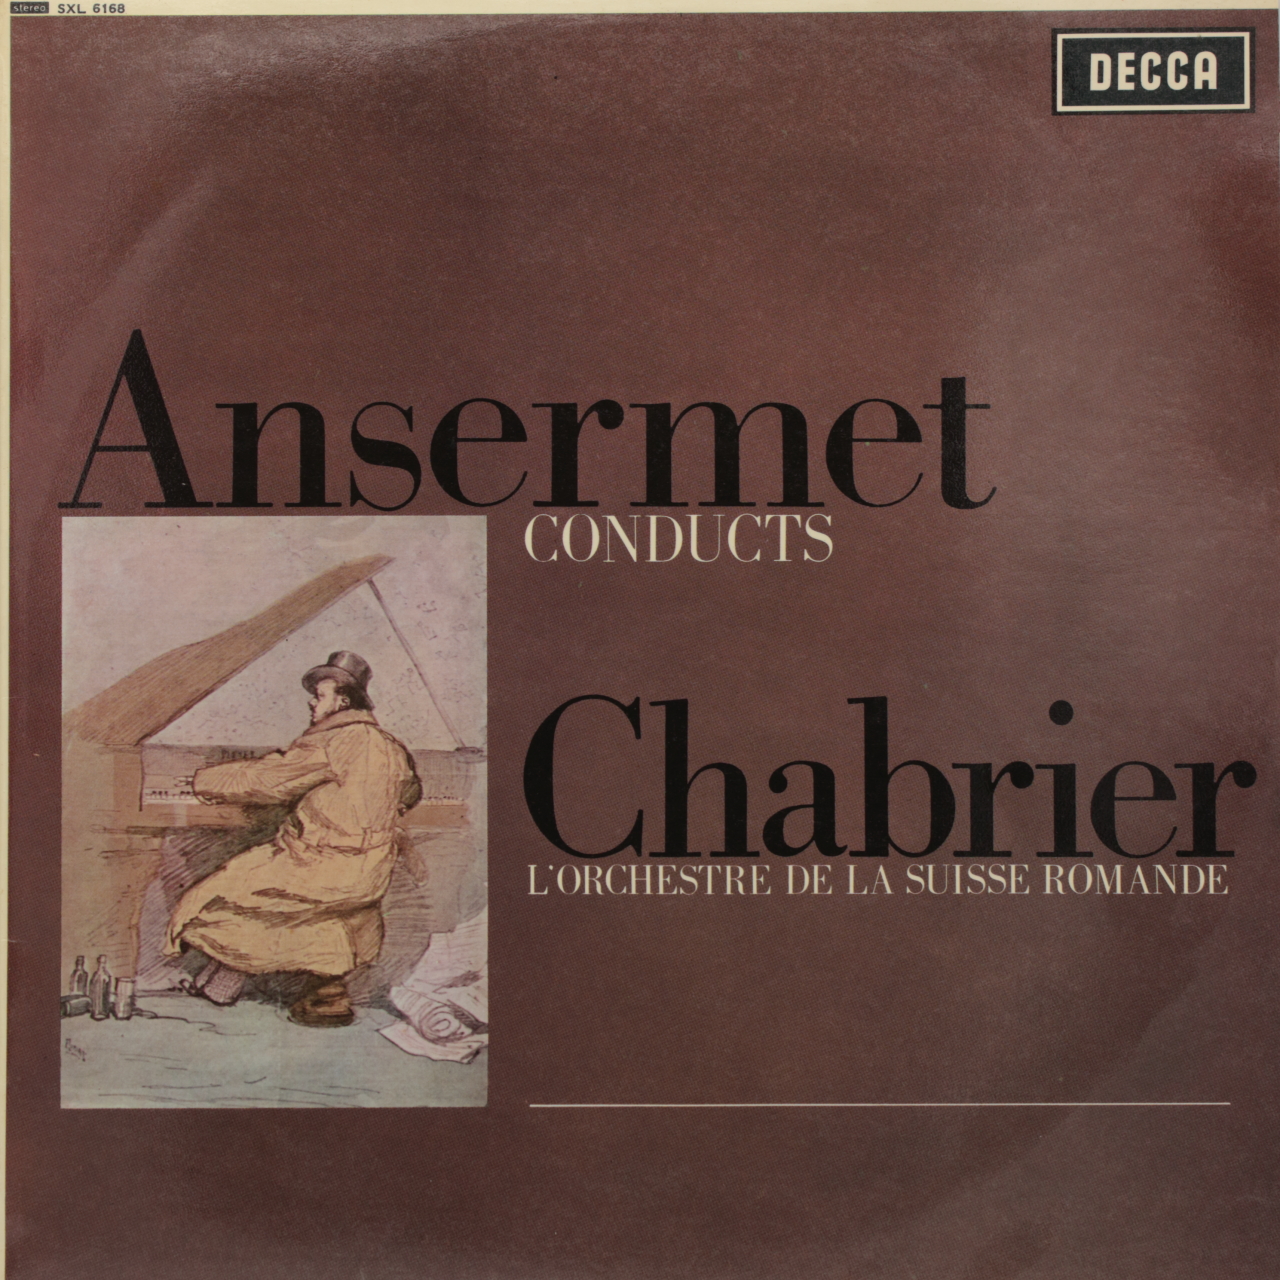 Chabrier: Ansermet Conducts Chabrier